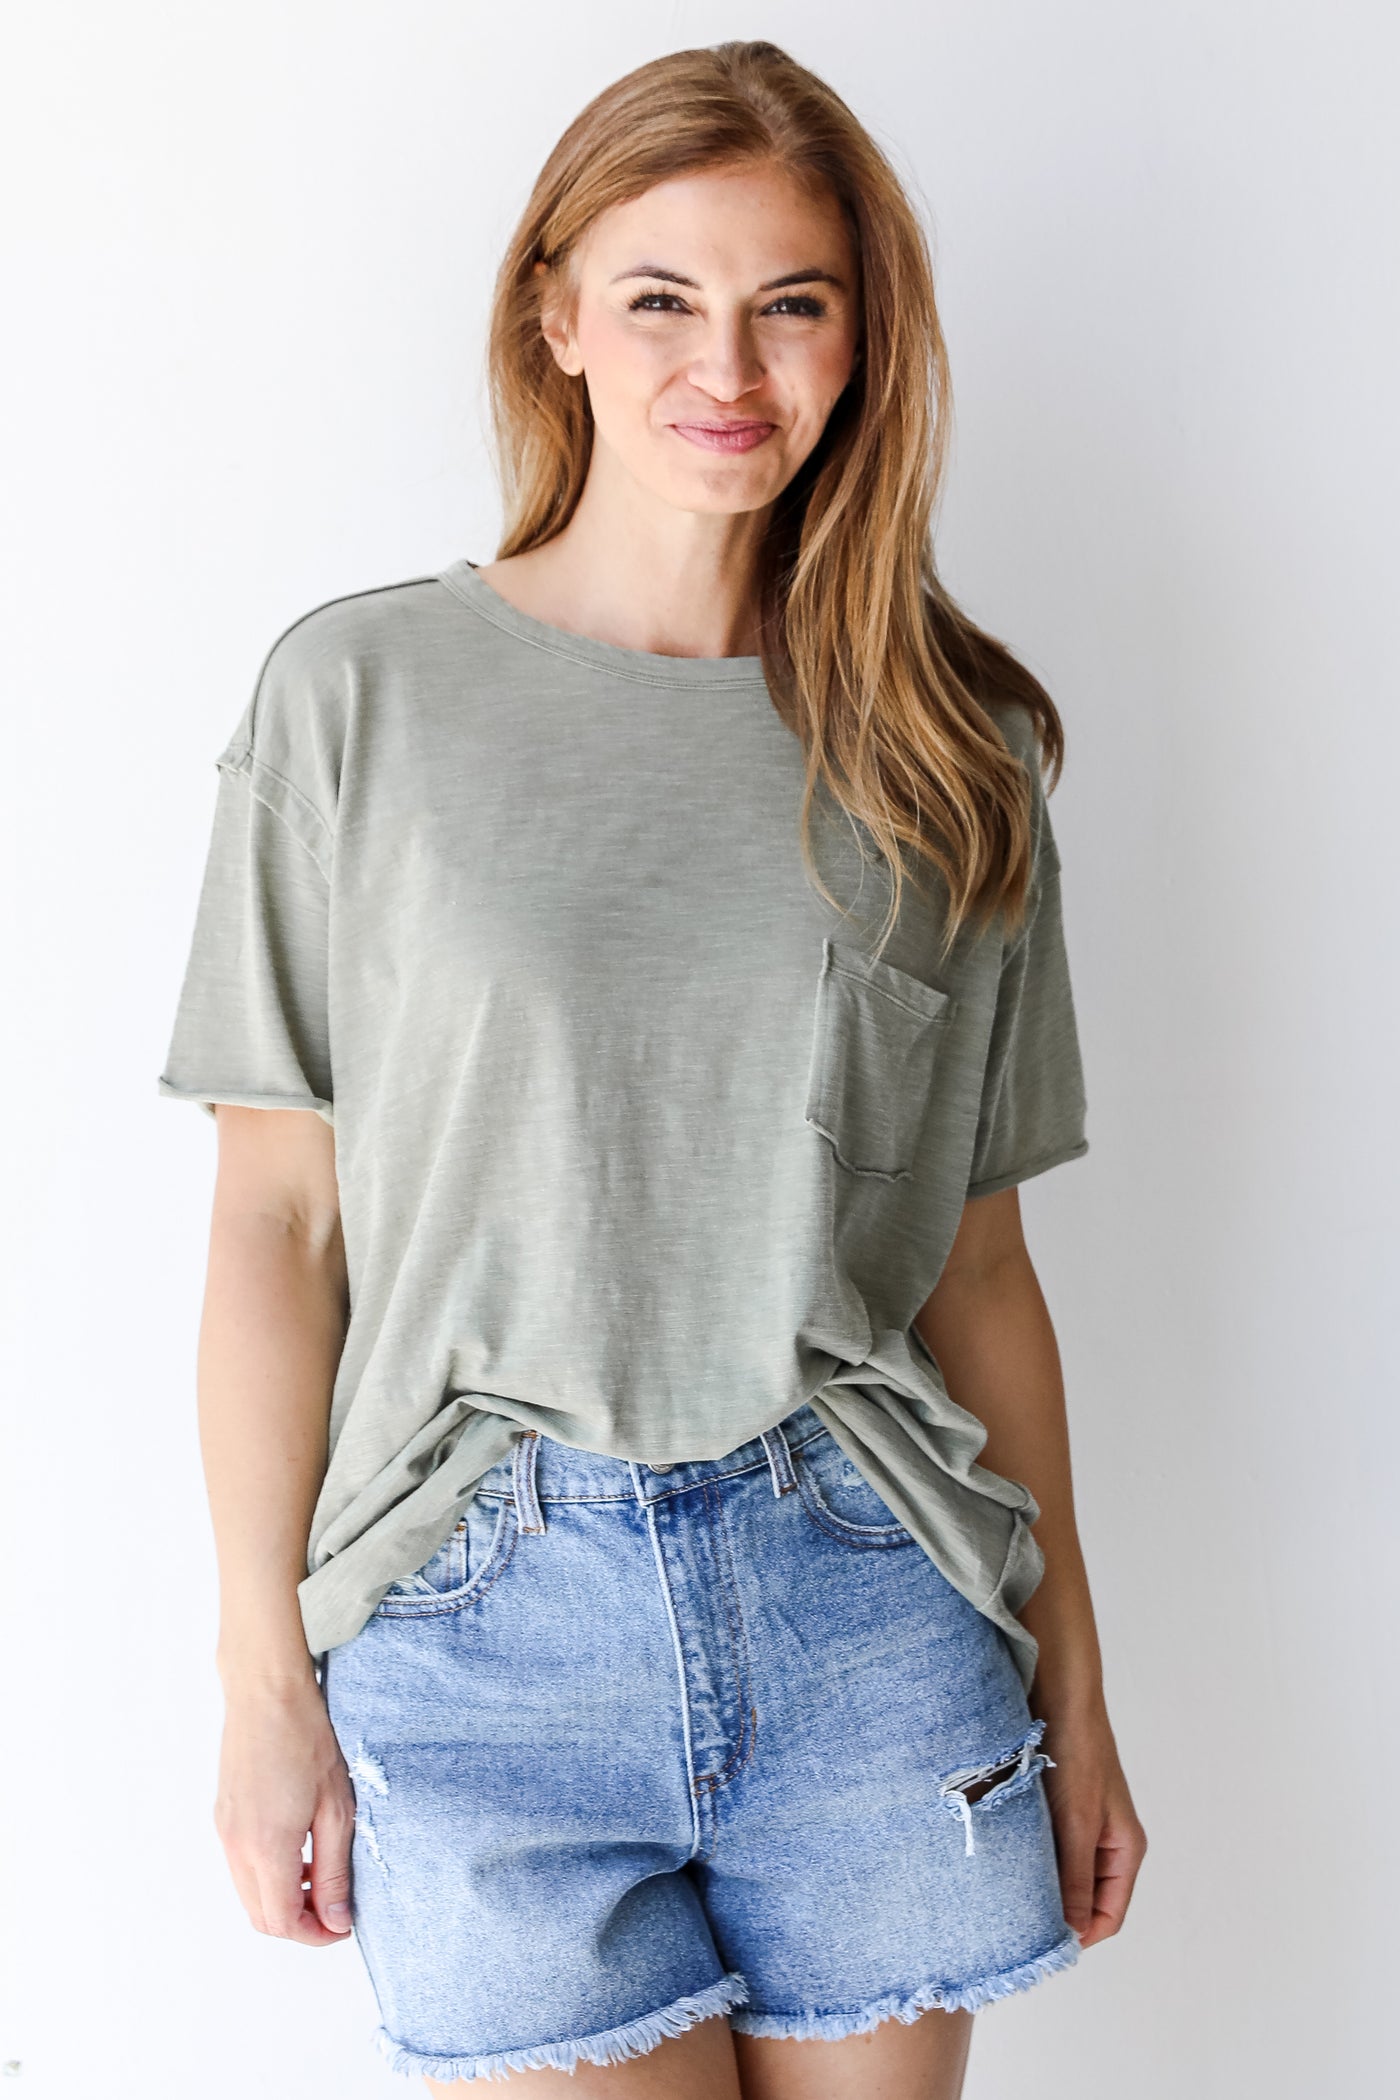 Tee in olive